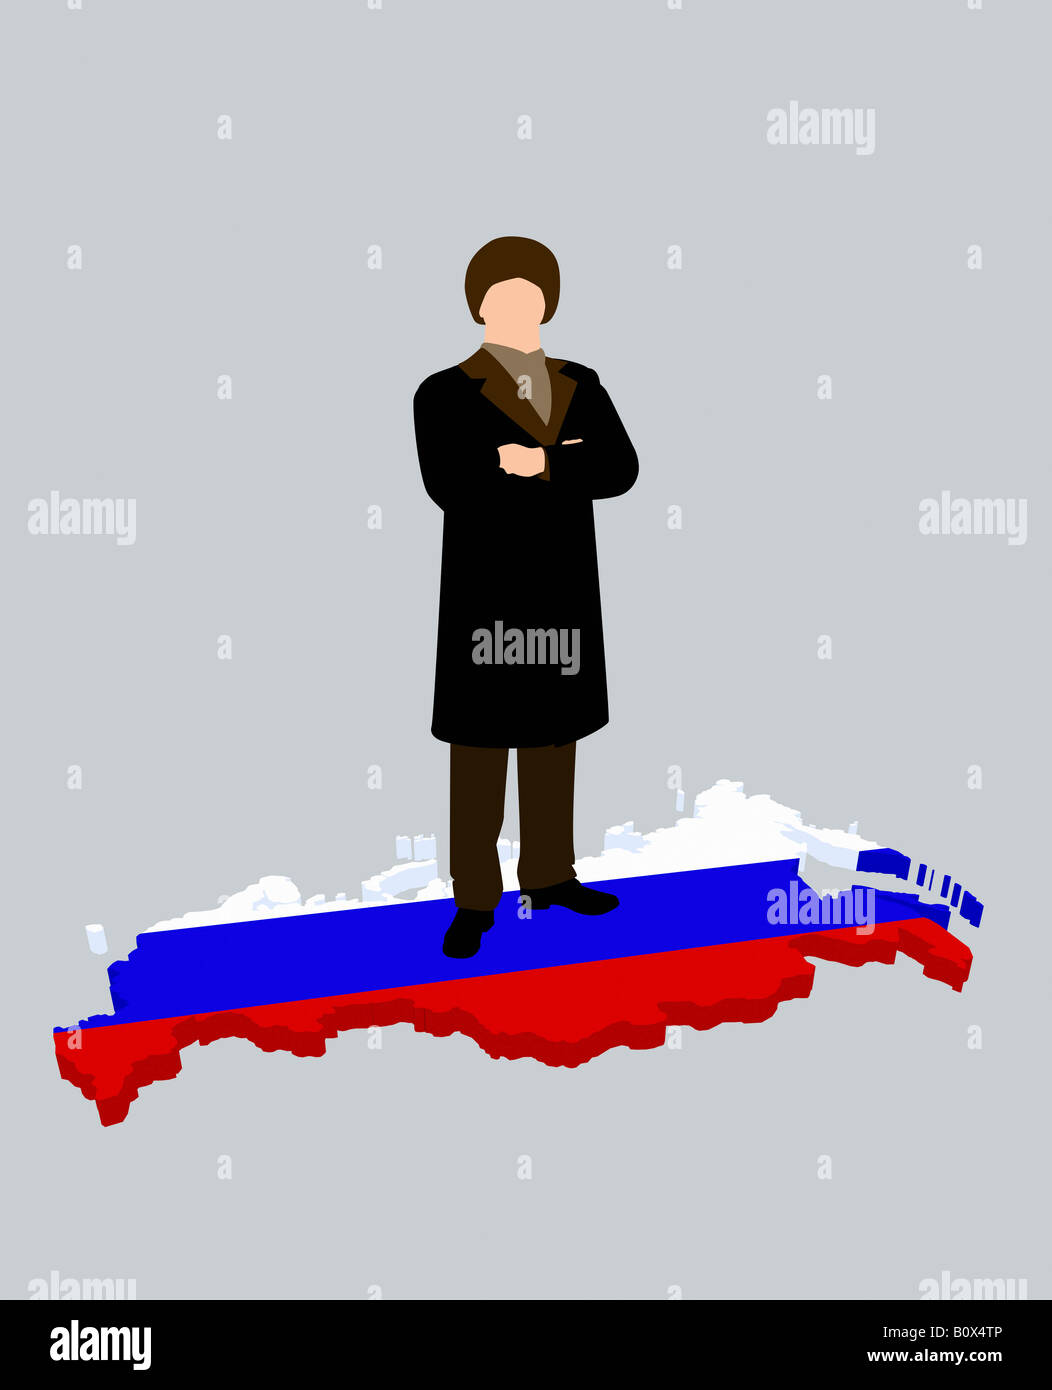 Stereotypical Russian man standing on a Russian flag in the shape of Russia Stock Photo